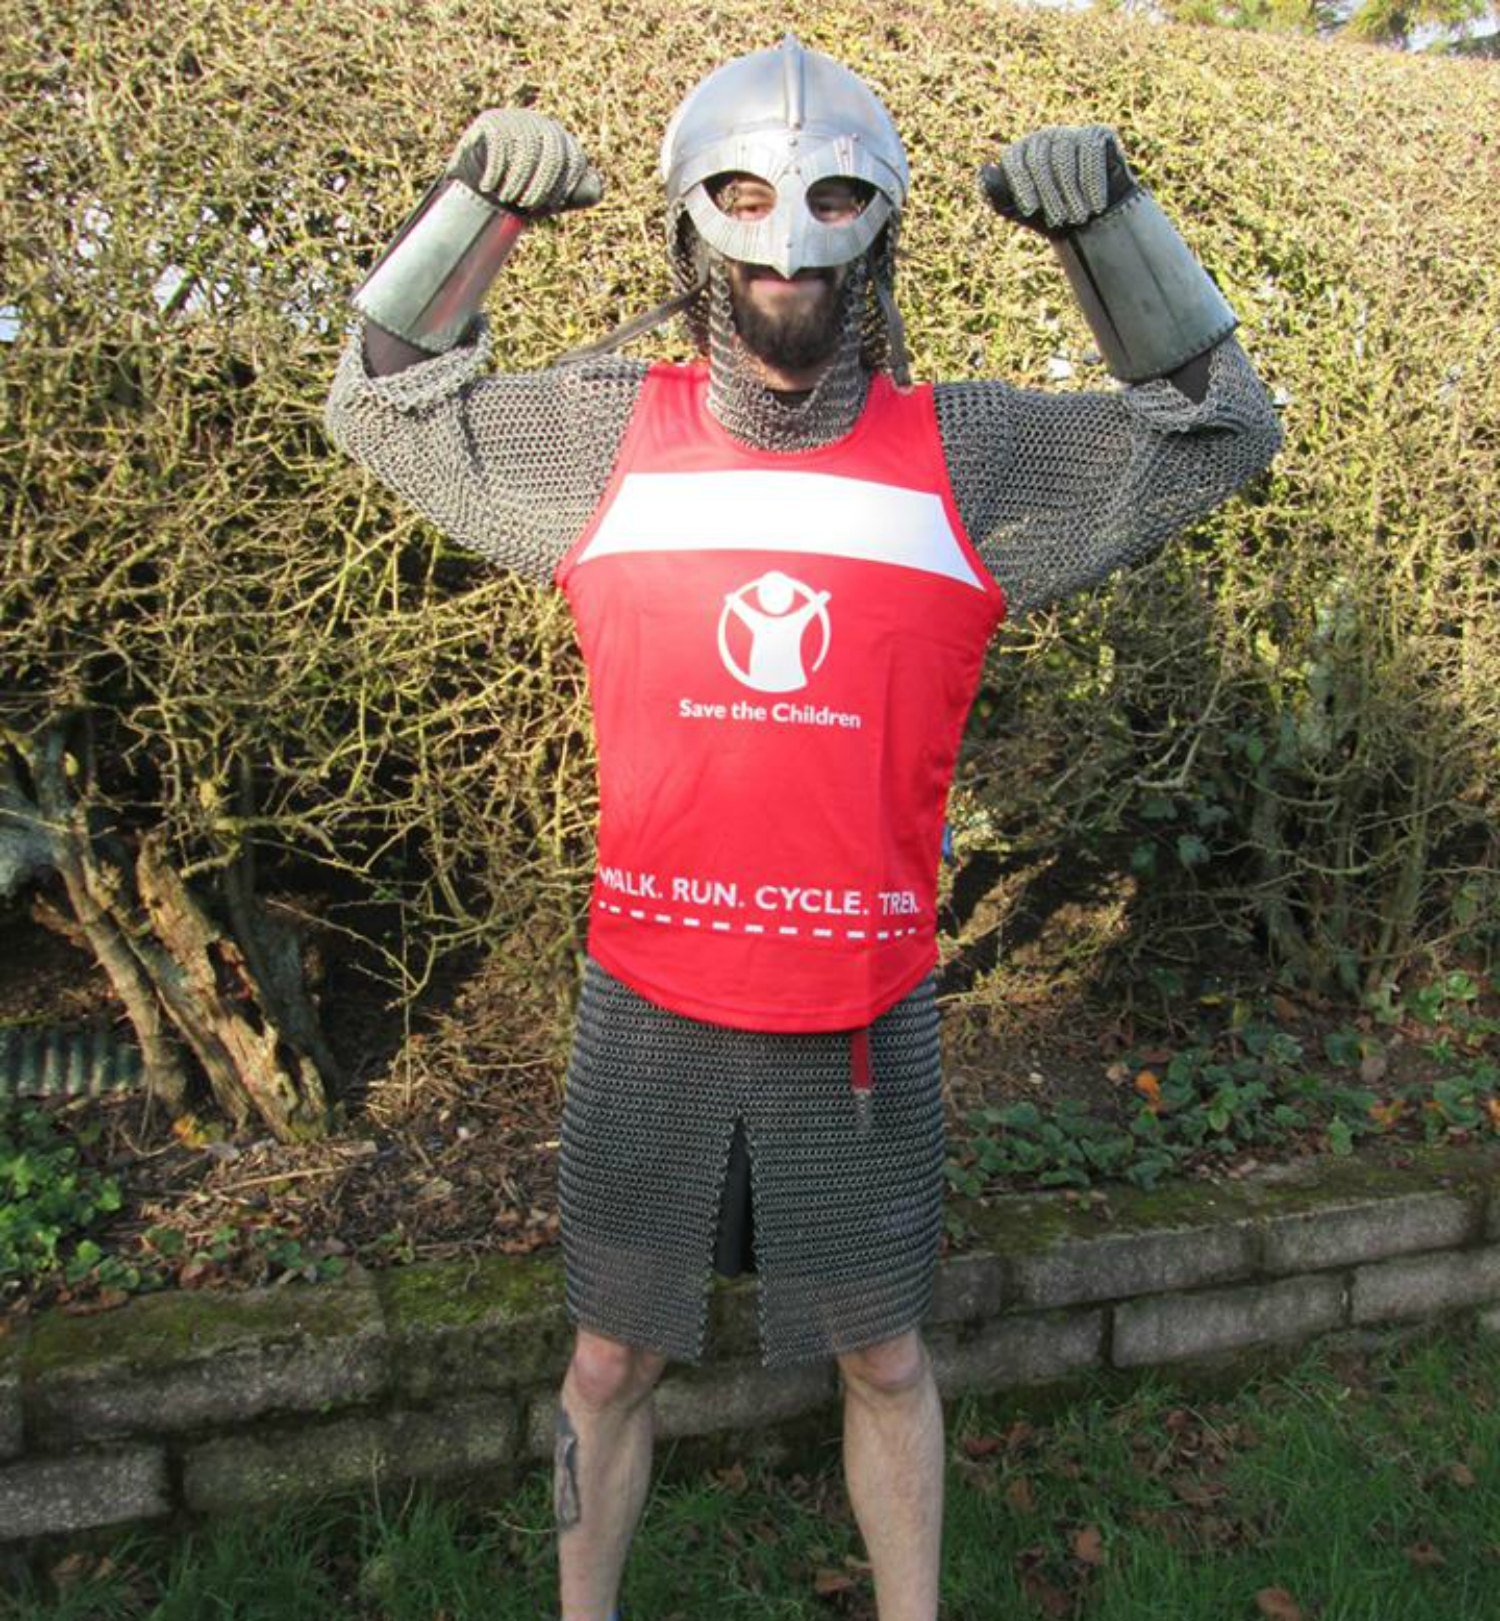 Liam will run 53.5 miles dressed as a viking. Photo: Liam the Viking Facebook Page